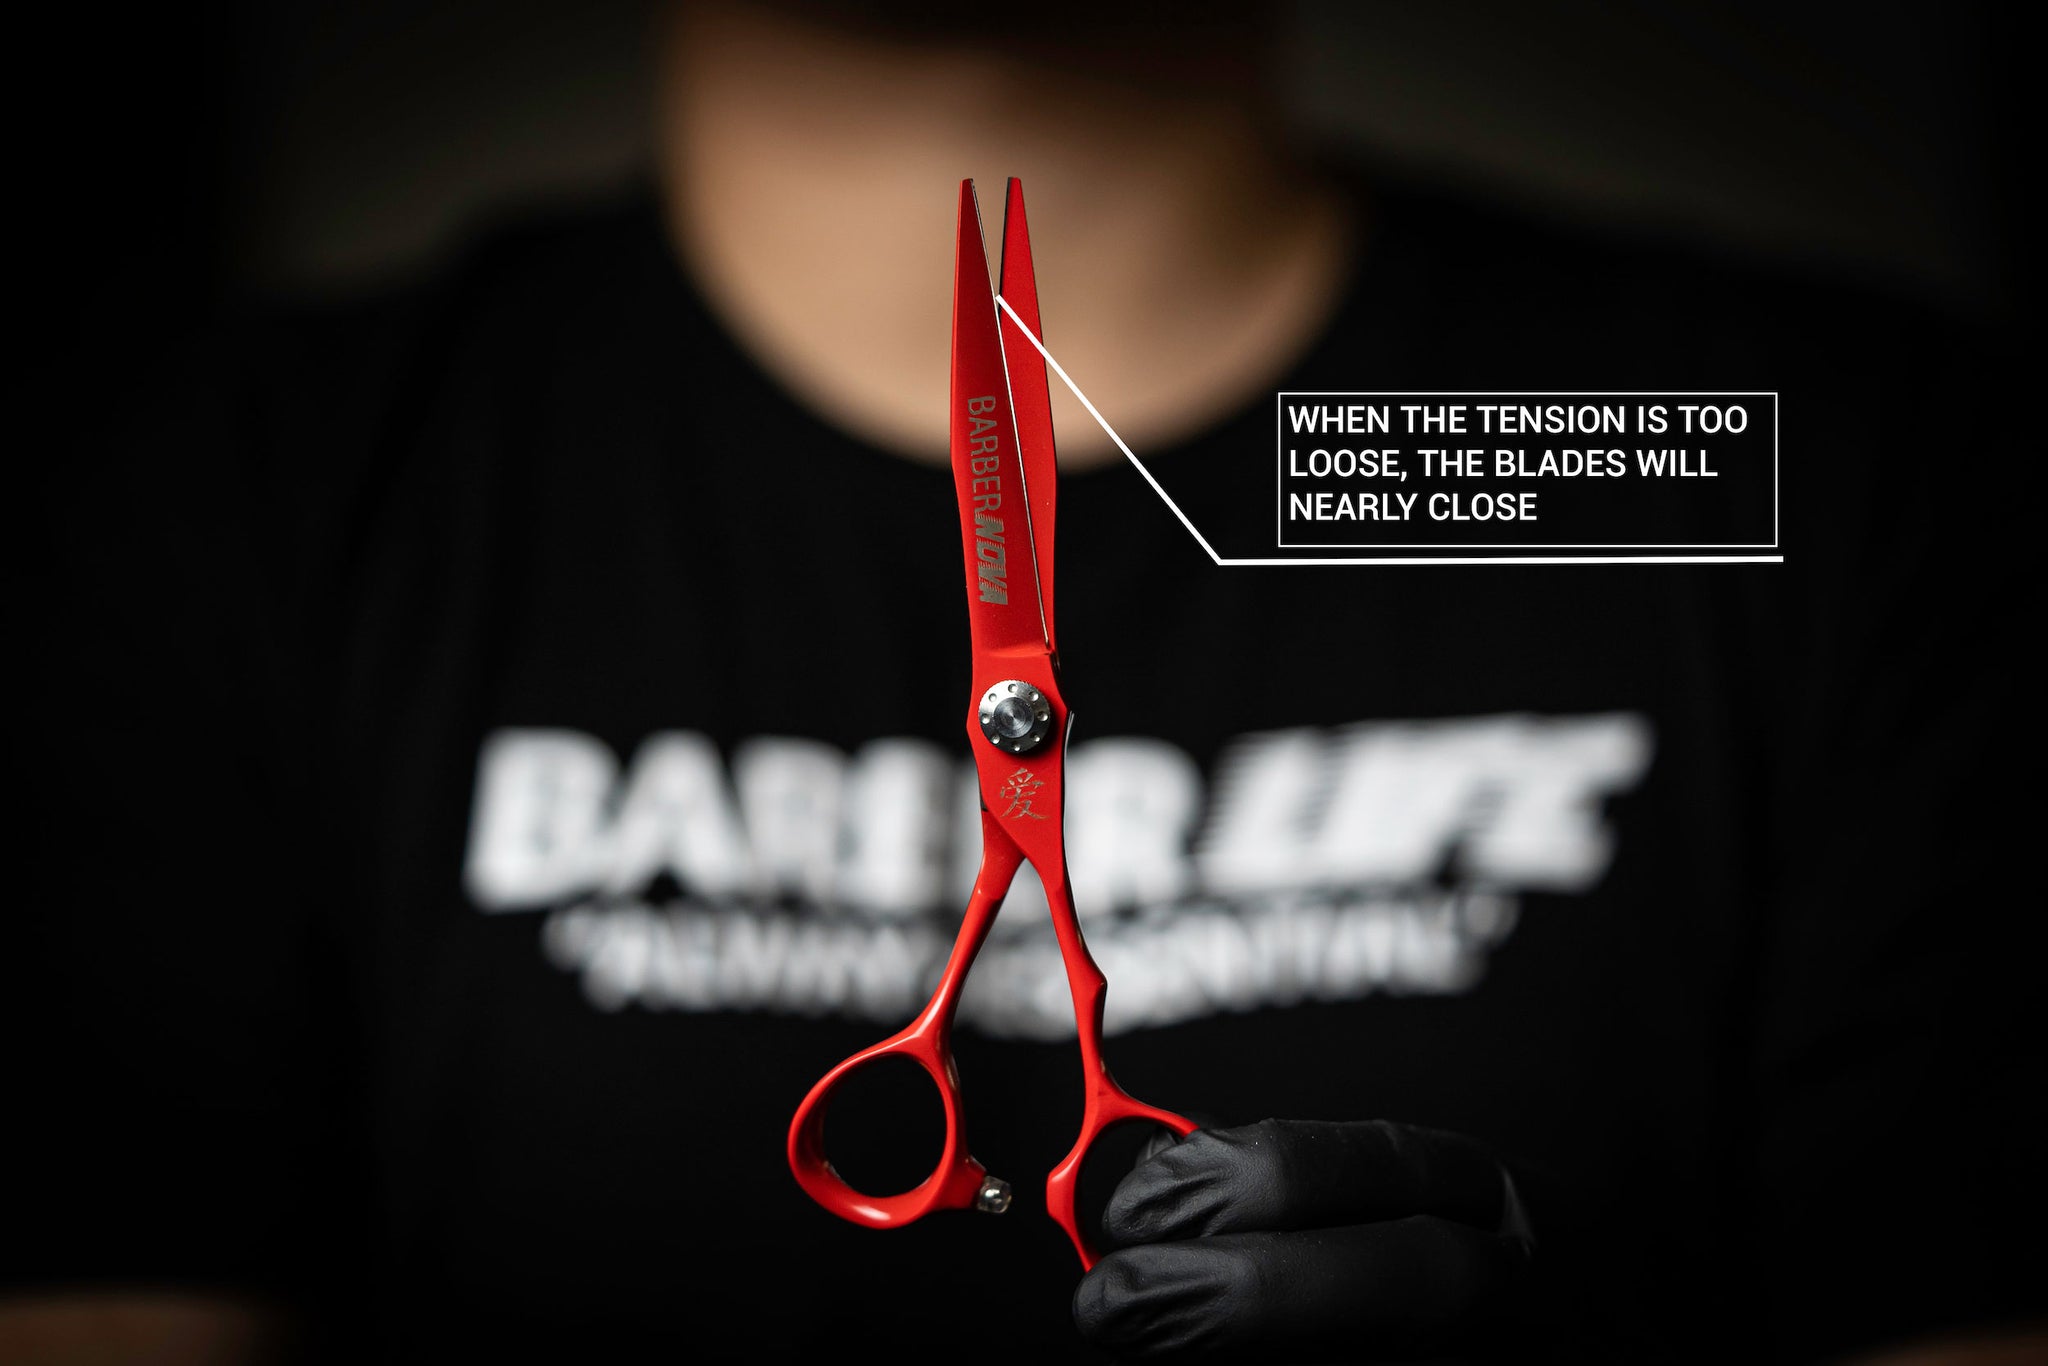 how to get the perfect shear tension, calibrating your shears